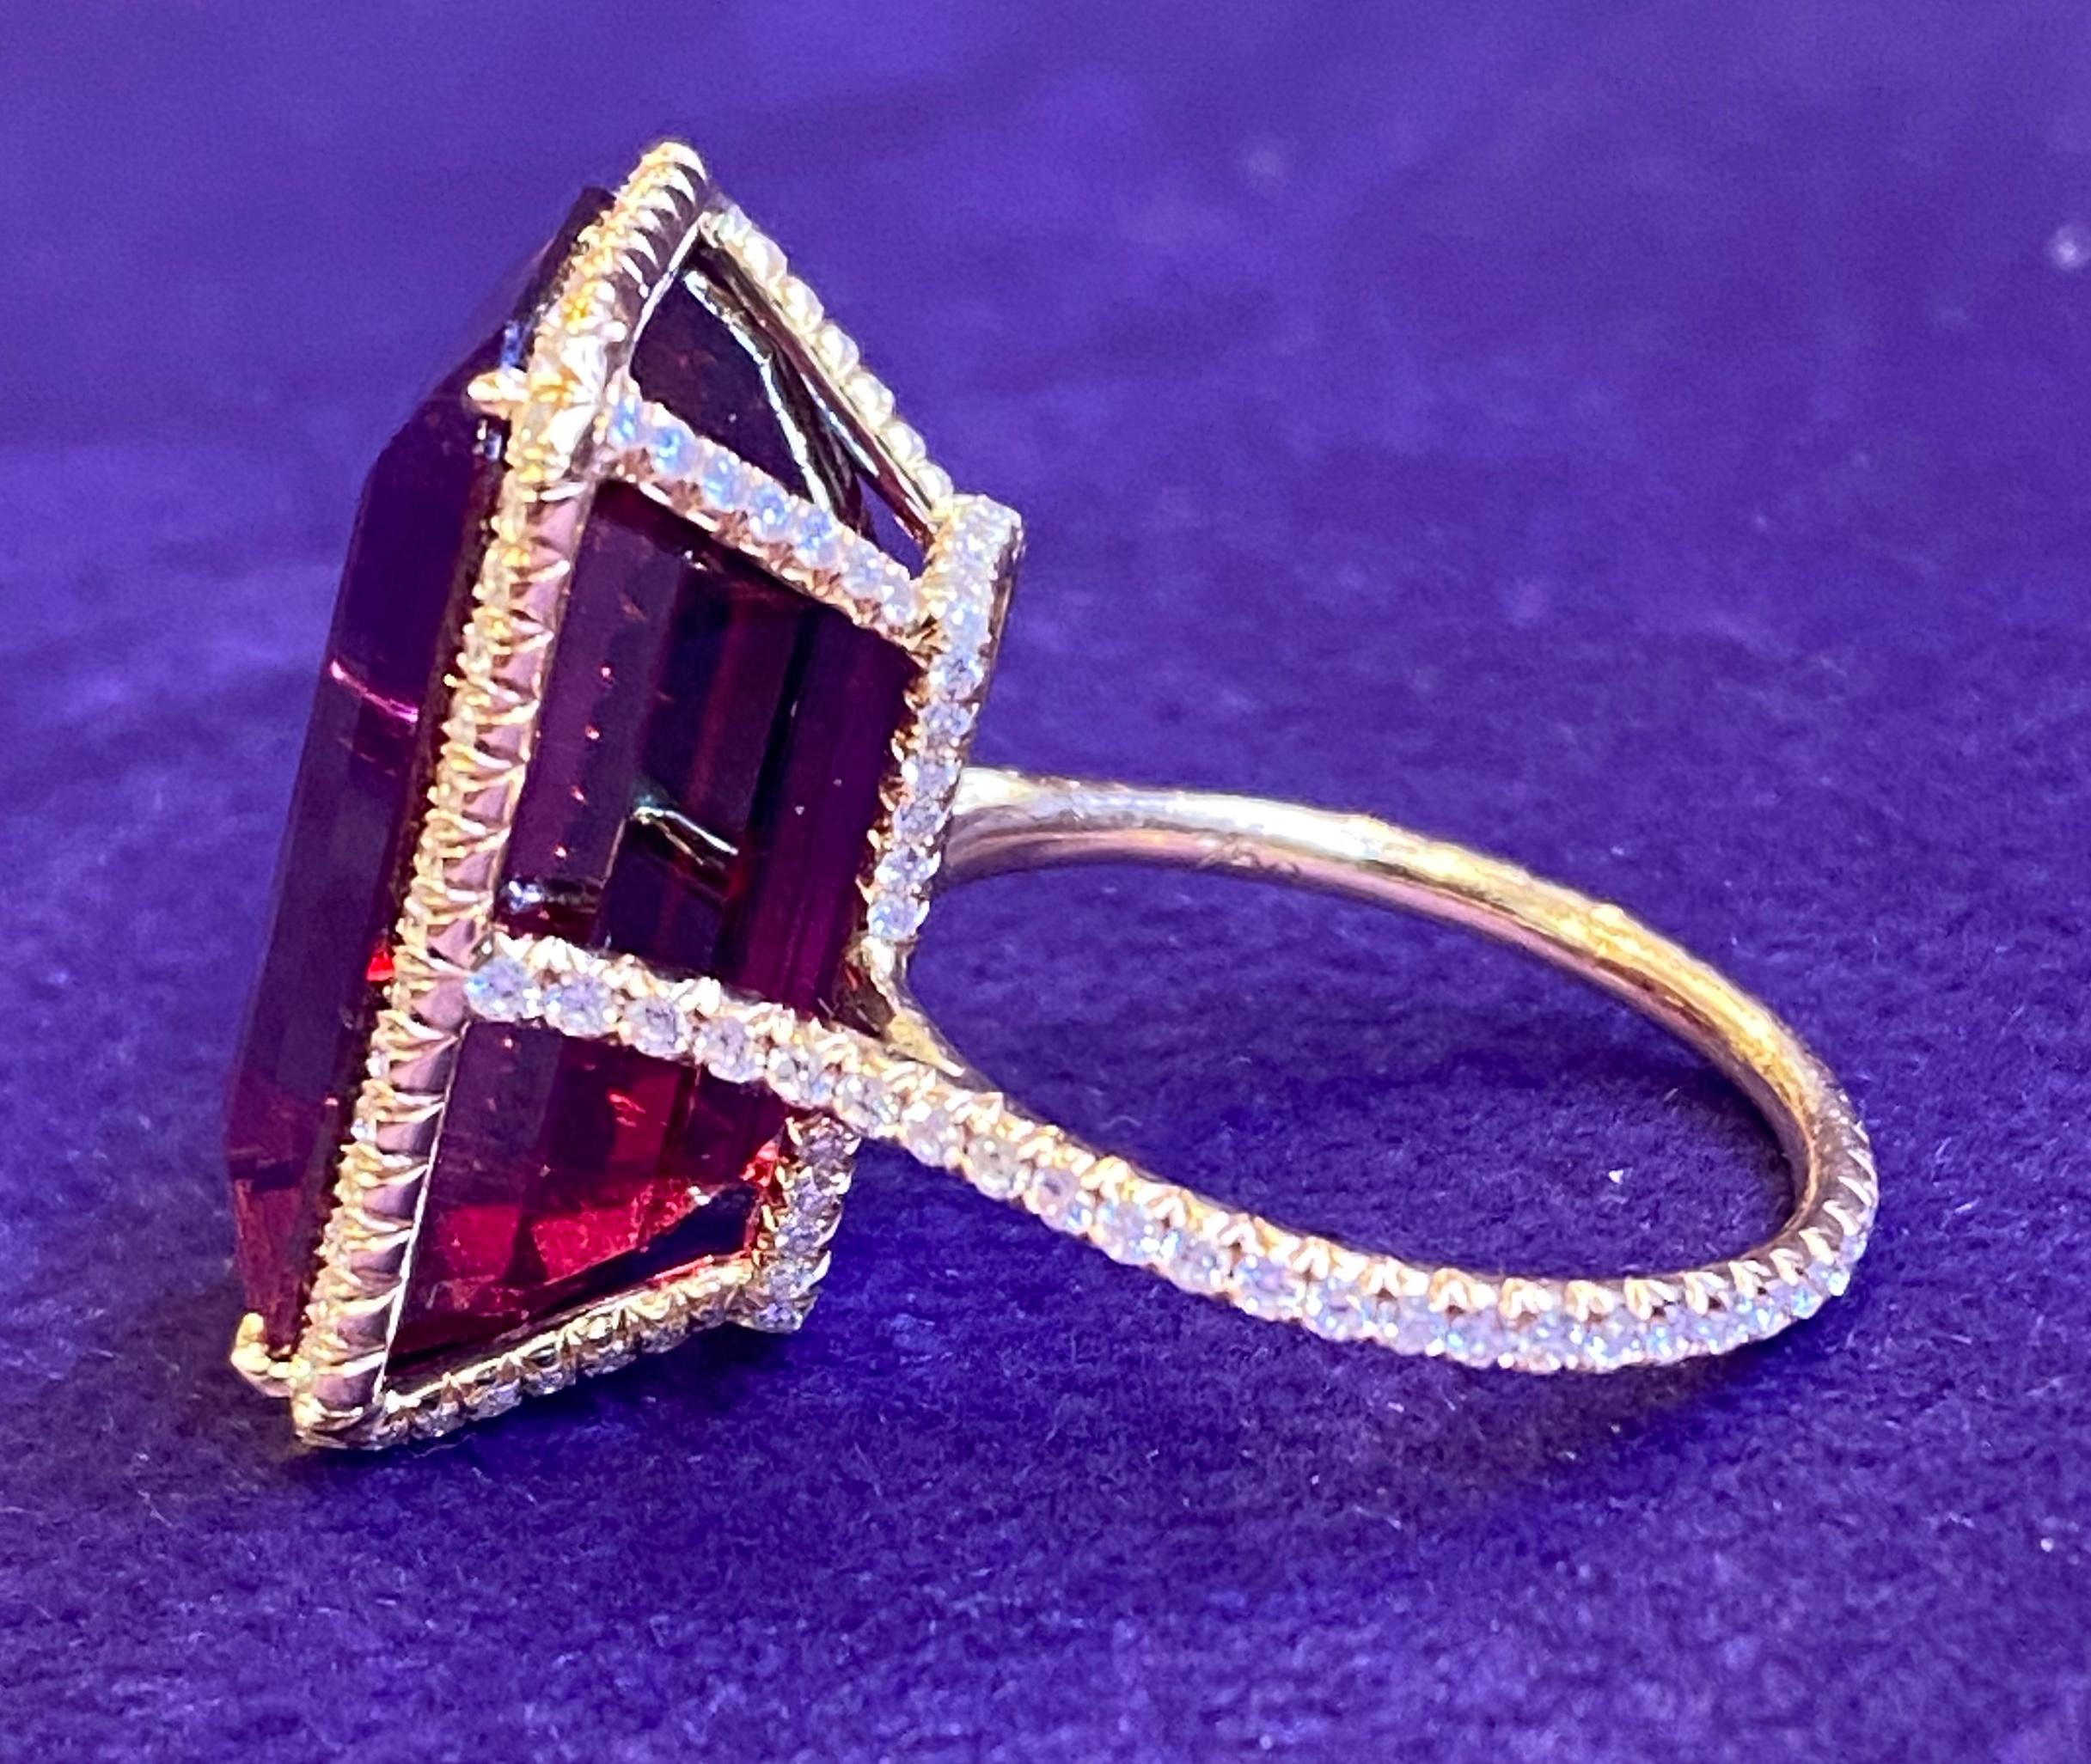 Emerald Cut 20 Carat Rubellite Tourmaline and Diamond Cocktail Ring For Sale